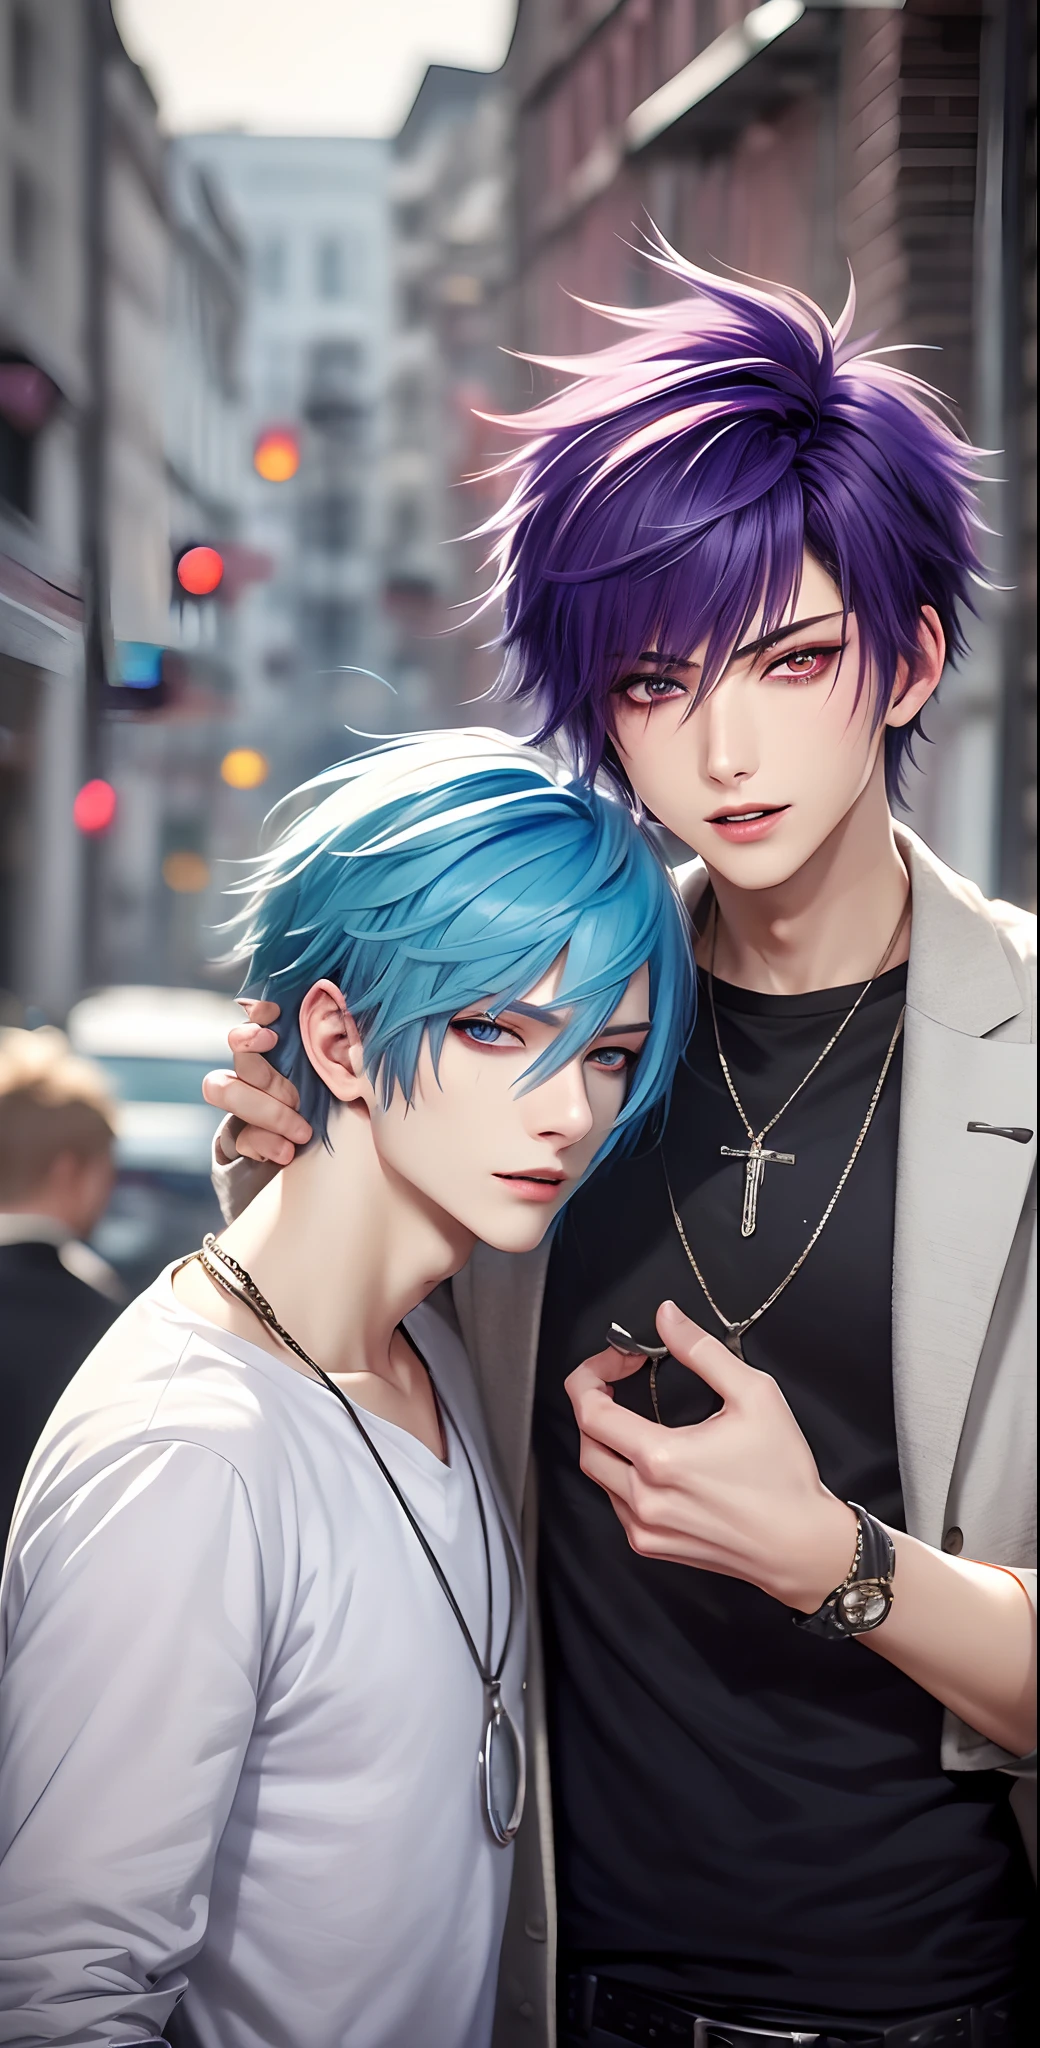 ​masterpiece, top-quality, 2Others, Male couple, 1 man and 1,, Adults, Height difference, different fashion, different color, finely eye and detailed face, intricate detailes, Casual clothing, Oversized shirt, Modern urban streets, A smile, Happiness, tenderness, queers, Boys Love, high-level image quality、 Two beautiful men、tall、The upper part of the body、nightfall、nighttime scene、𝓡𝓸𝓶𝓪𝓷𝓽𝓲𝓬、Korean Male, Idol Photos, k pop, Professional Photos, Vampires, Korean fashion in black and white, Fedoman with necklace, inspired by Sim Sa-jeong, androgynous vampire, :9 detailed face: 8, extra detailed face, detailed punk hair, ((eyes are brown)) baggy eyes, Seductive. Highly detailed, semi realistic anime, Vampires, hyperrealistic teen, delicate androgynous prince, imvu, short hair above the ears, Man with short hair, With a purple-haired man with a wild expression, Man with light blue hair with gentle expression, ((With a short-haired man with bright purple hair)), ((Man with light blue hair))